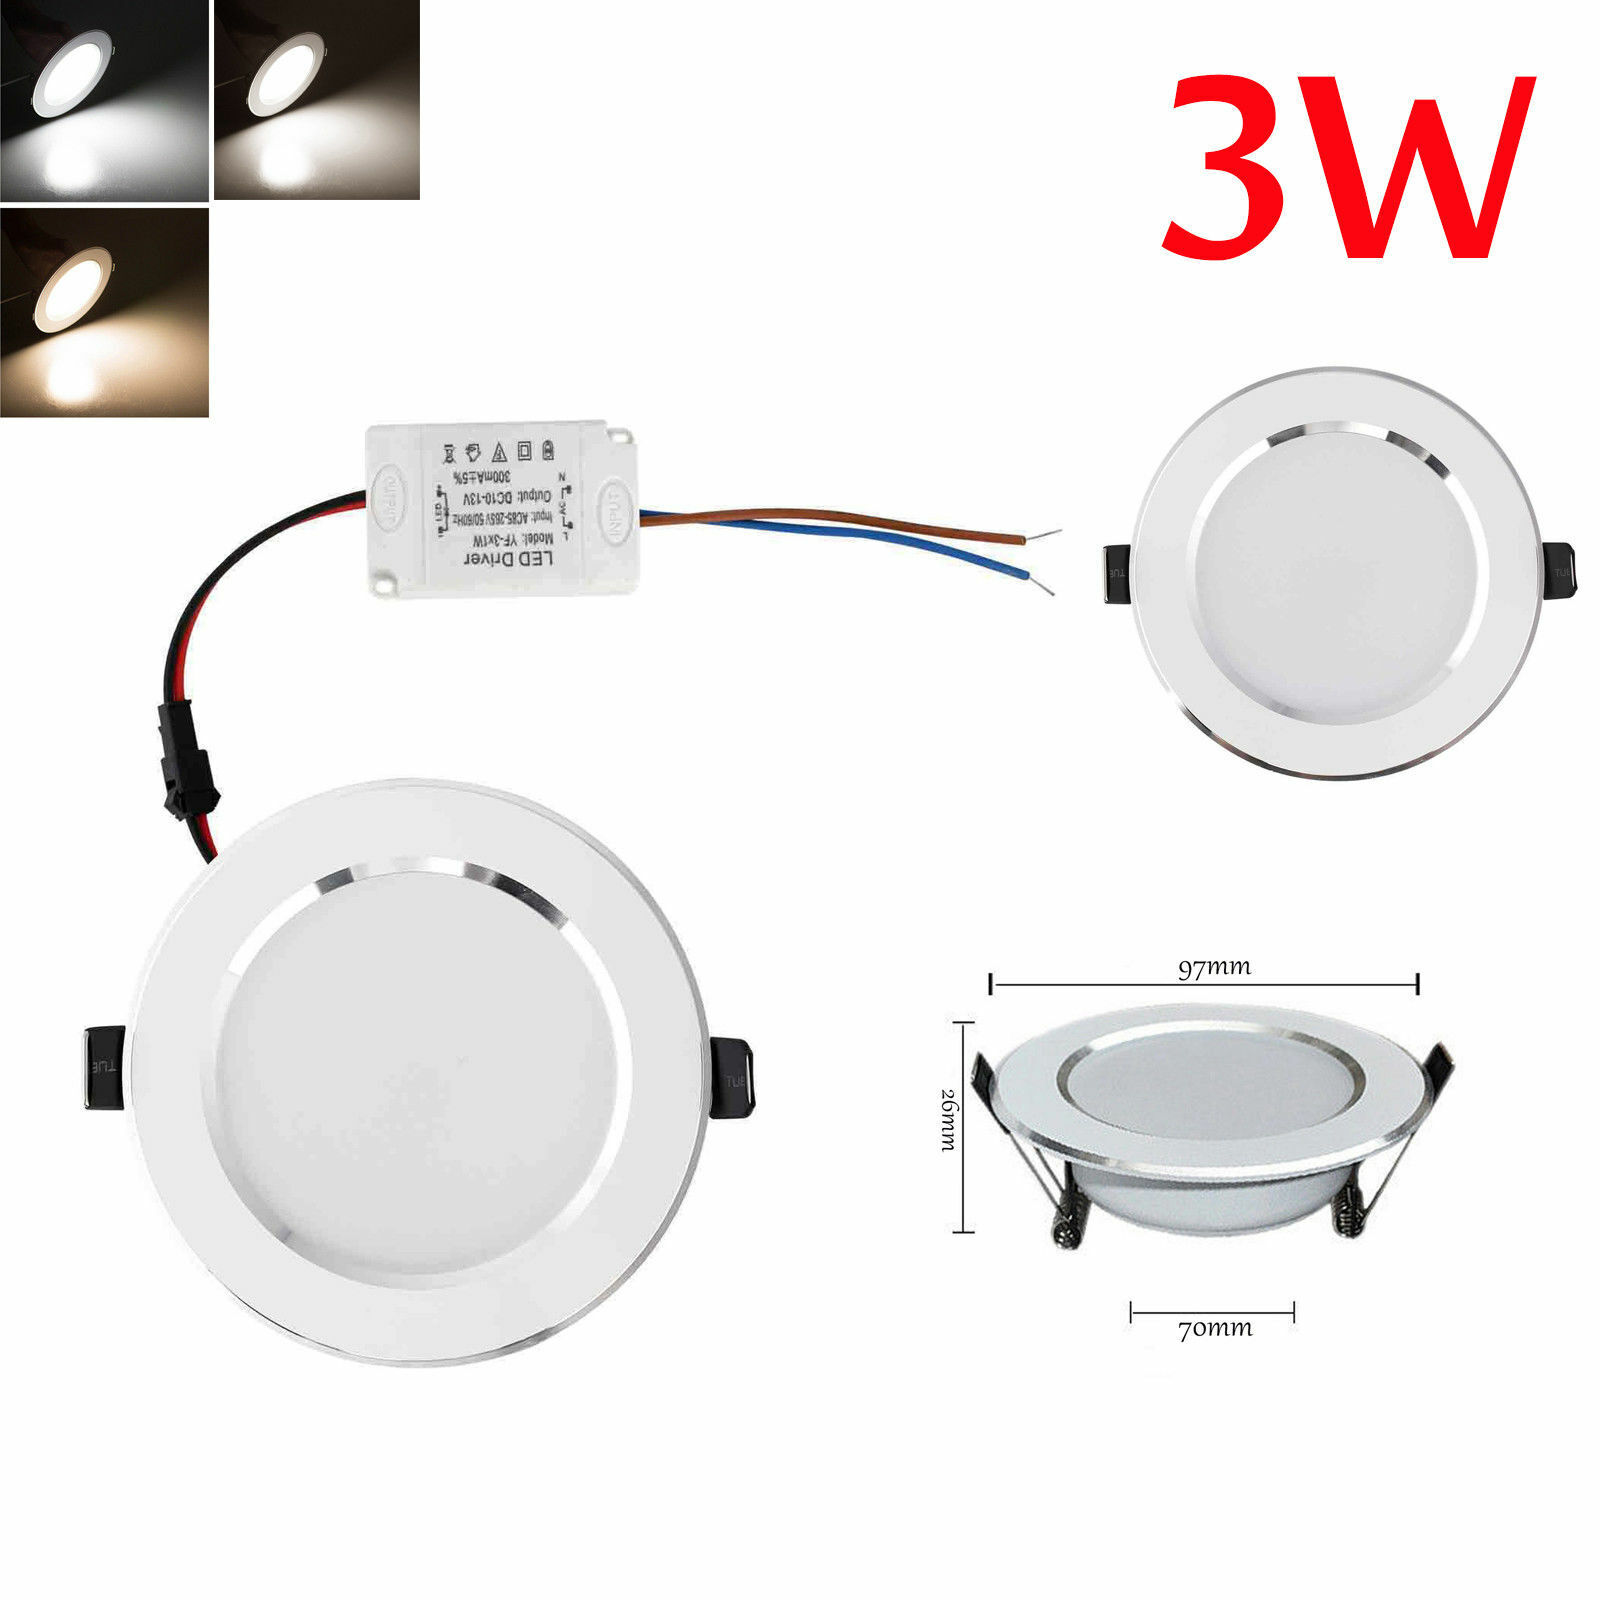 LED Panel Downlight Recessed Ceiling Light Lamp Dimmable 3W 5W 7W 9W 12W Room